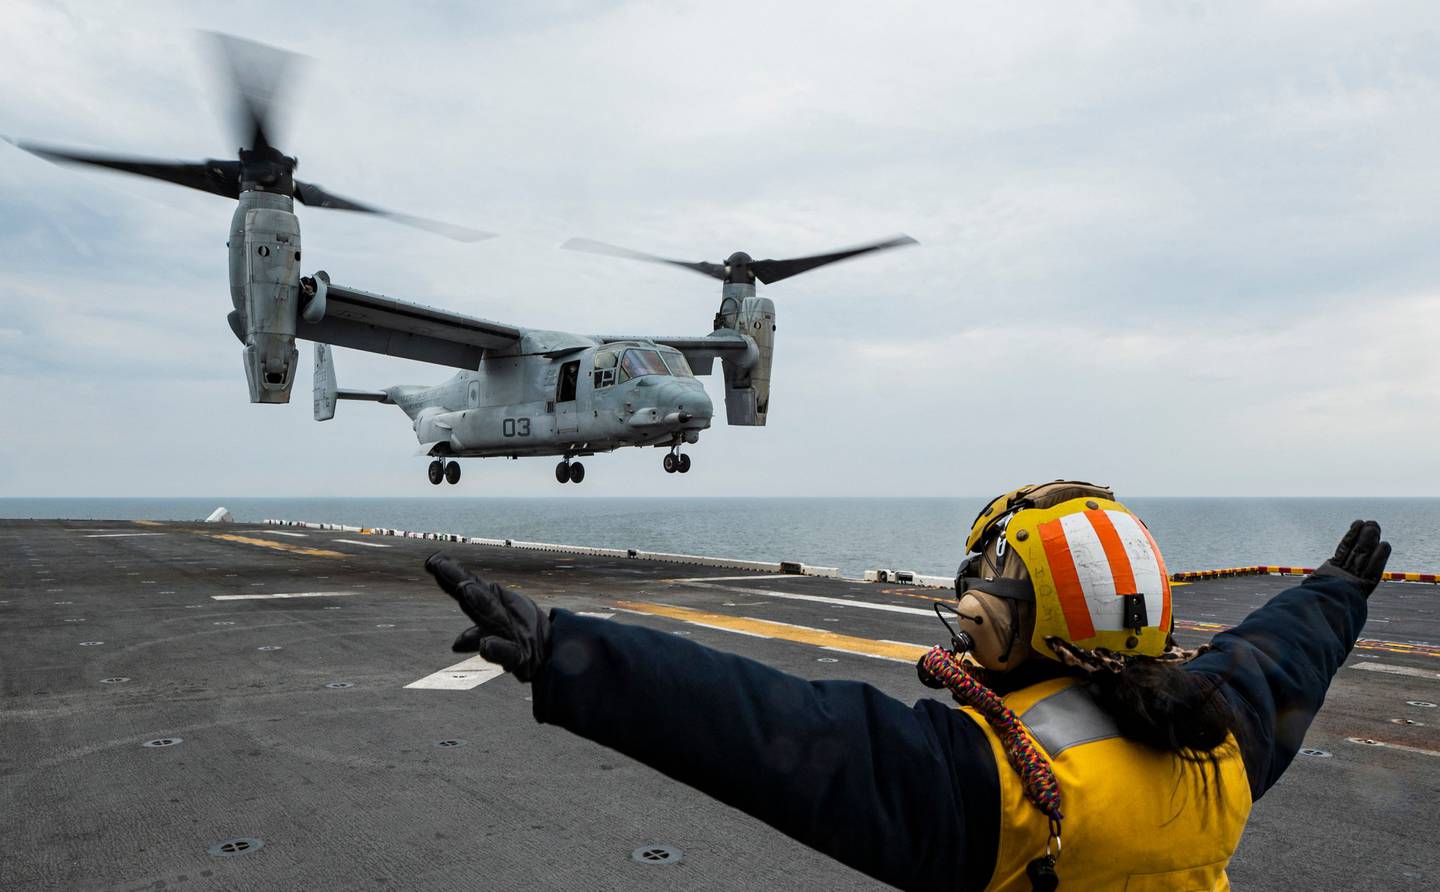 An MV-22 Osprey assault support aircraft prepares to land on the flight deck of the 'USS Kearsarge' during military exercises in the Baltic Sea. AFP